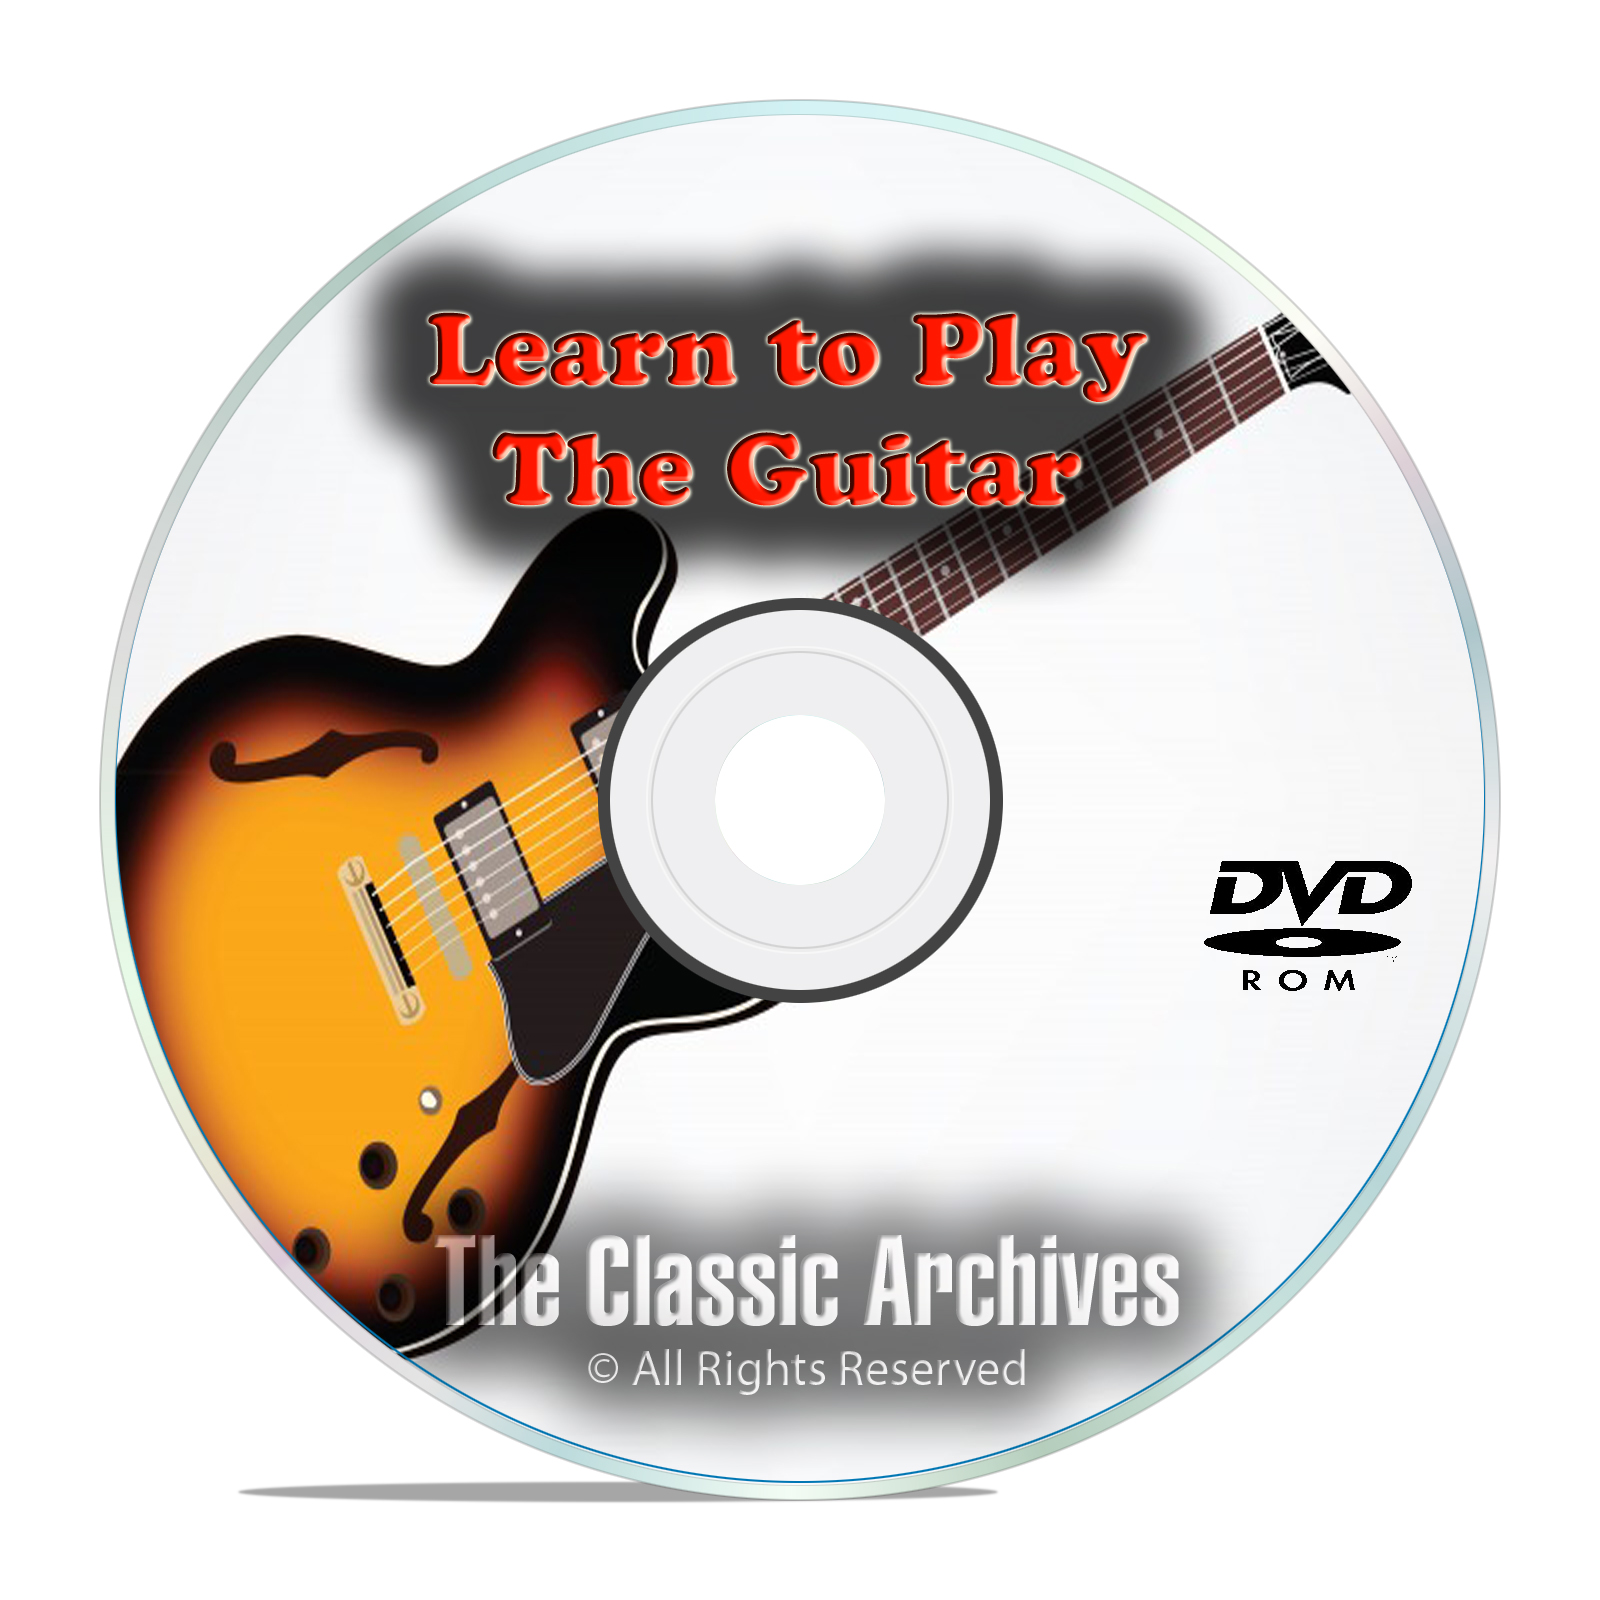 Learn How To Play the Guitar, Electric or Acoustic, Tutorial Lessons DVD